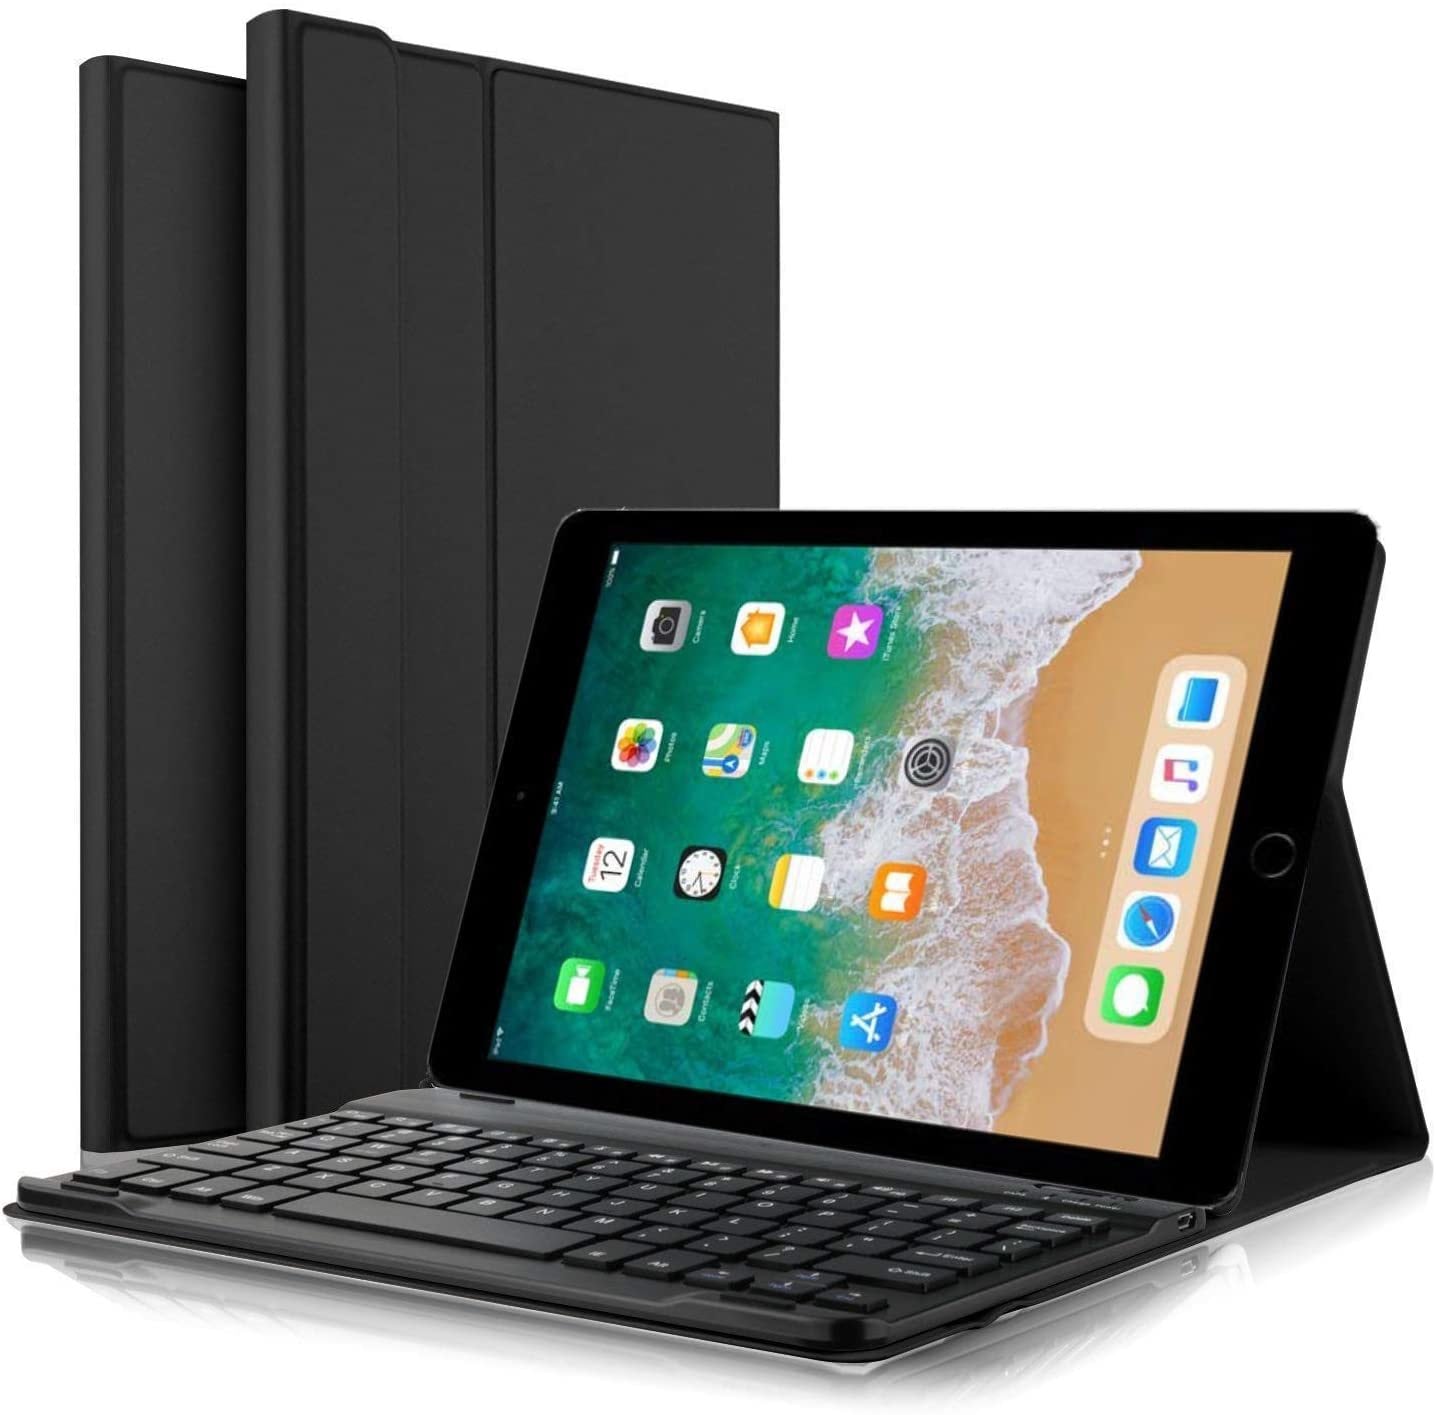 Detachable Magnetically Bluetooth Wireless Keyboard for iPad Air 3 2019//iPad Pro 10.5 2017 iPad Keyboard Case 10.2 inch 2020 iPad 8//7 Keyboard Cover with 7 Colors Backlit and Pencil Holder Black